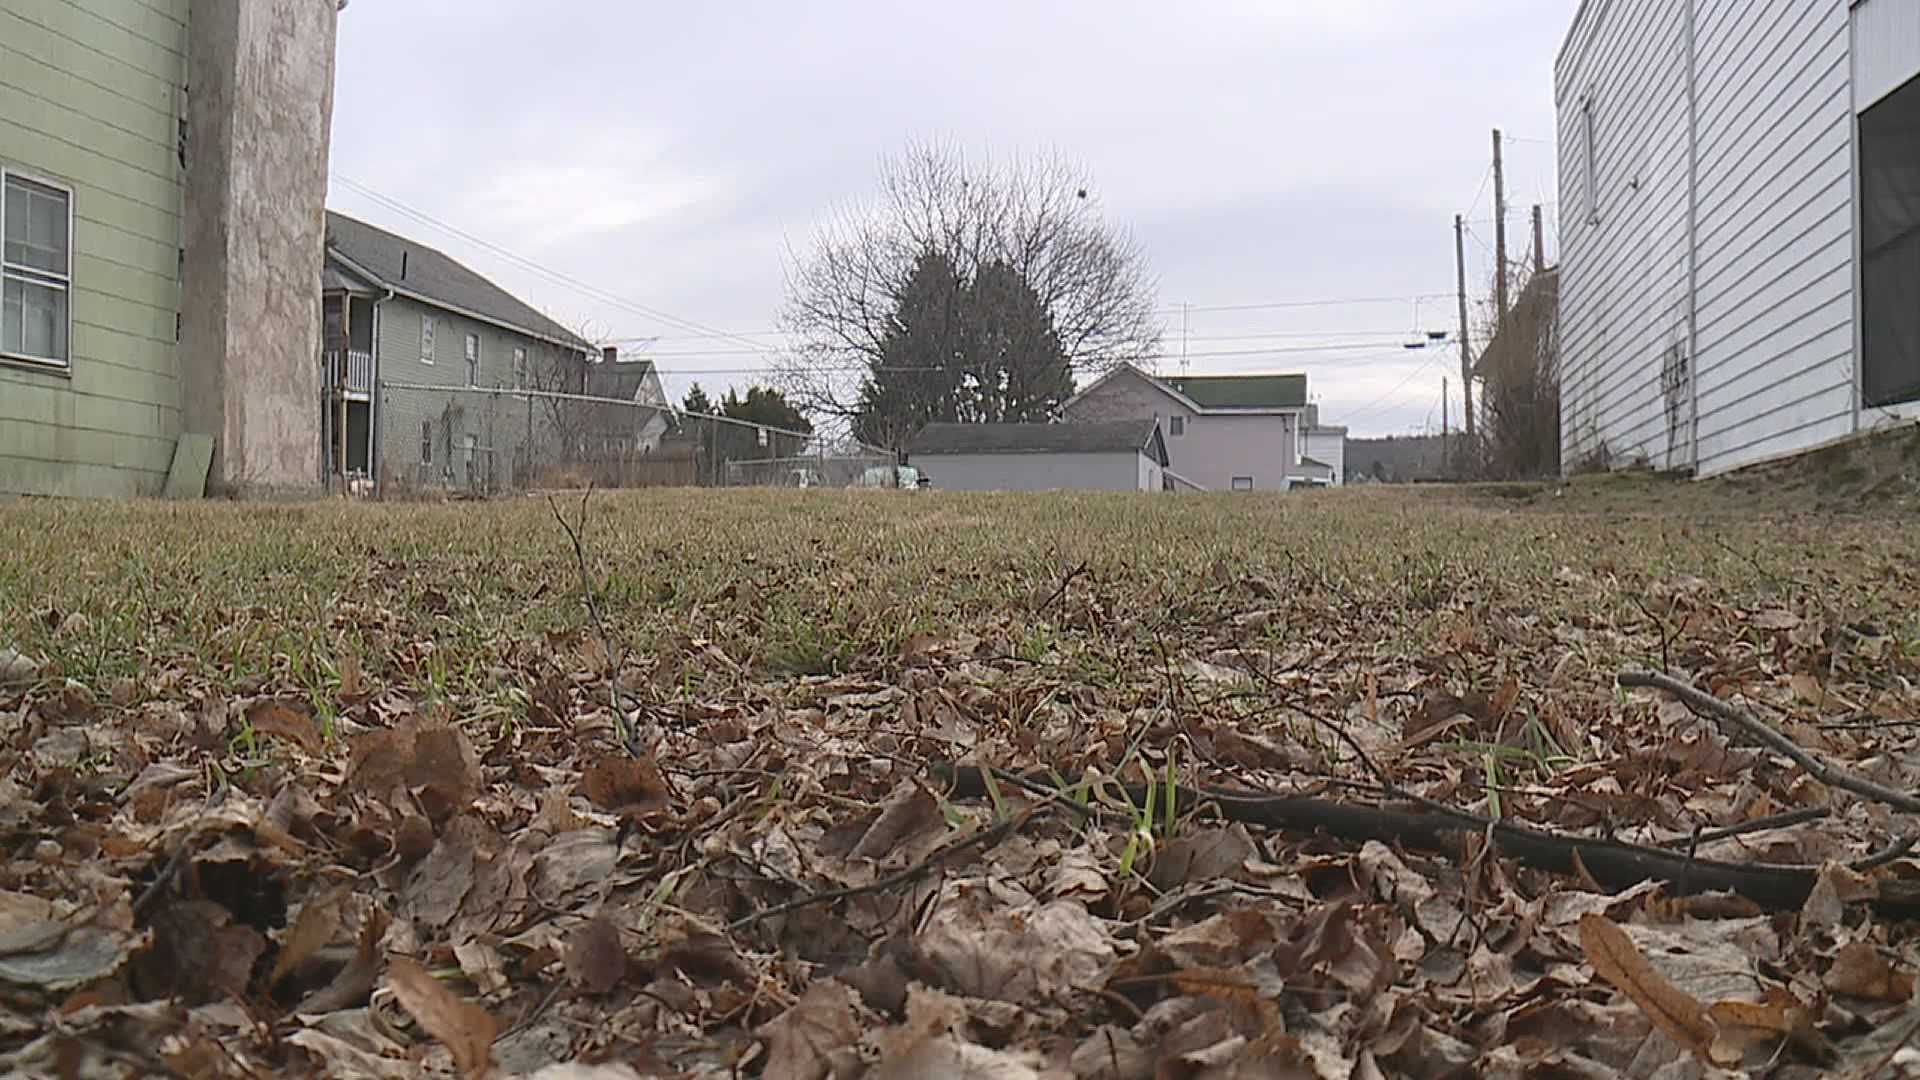 A vacant lot in Scranton is getting spruced up, thanks to a University of Scranton alumnus.